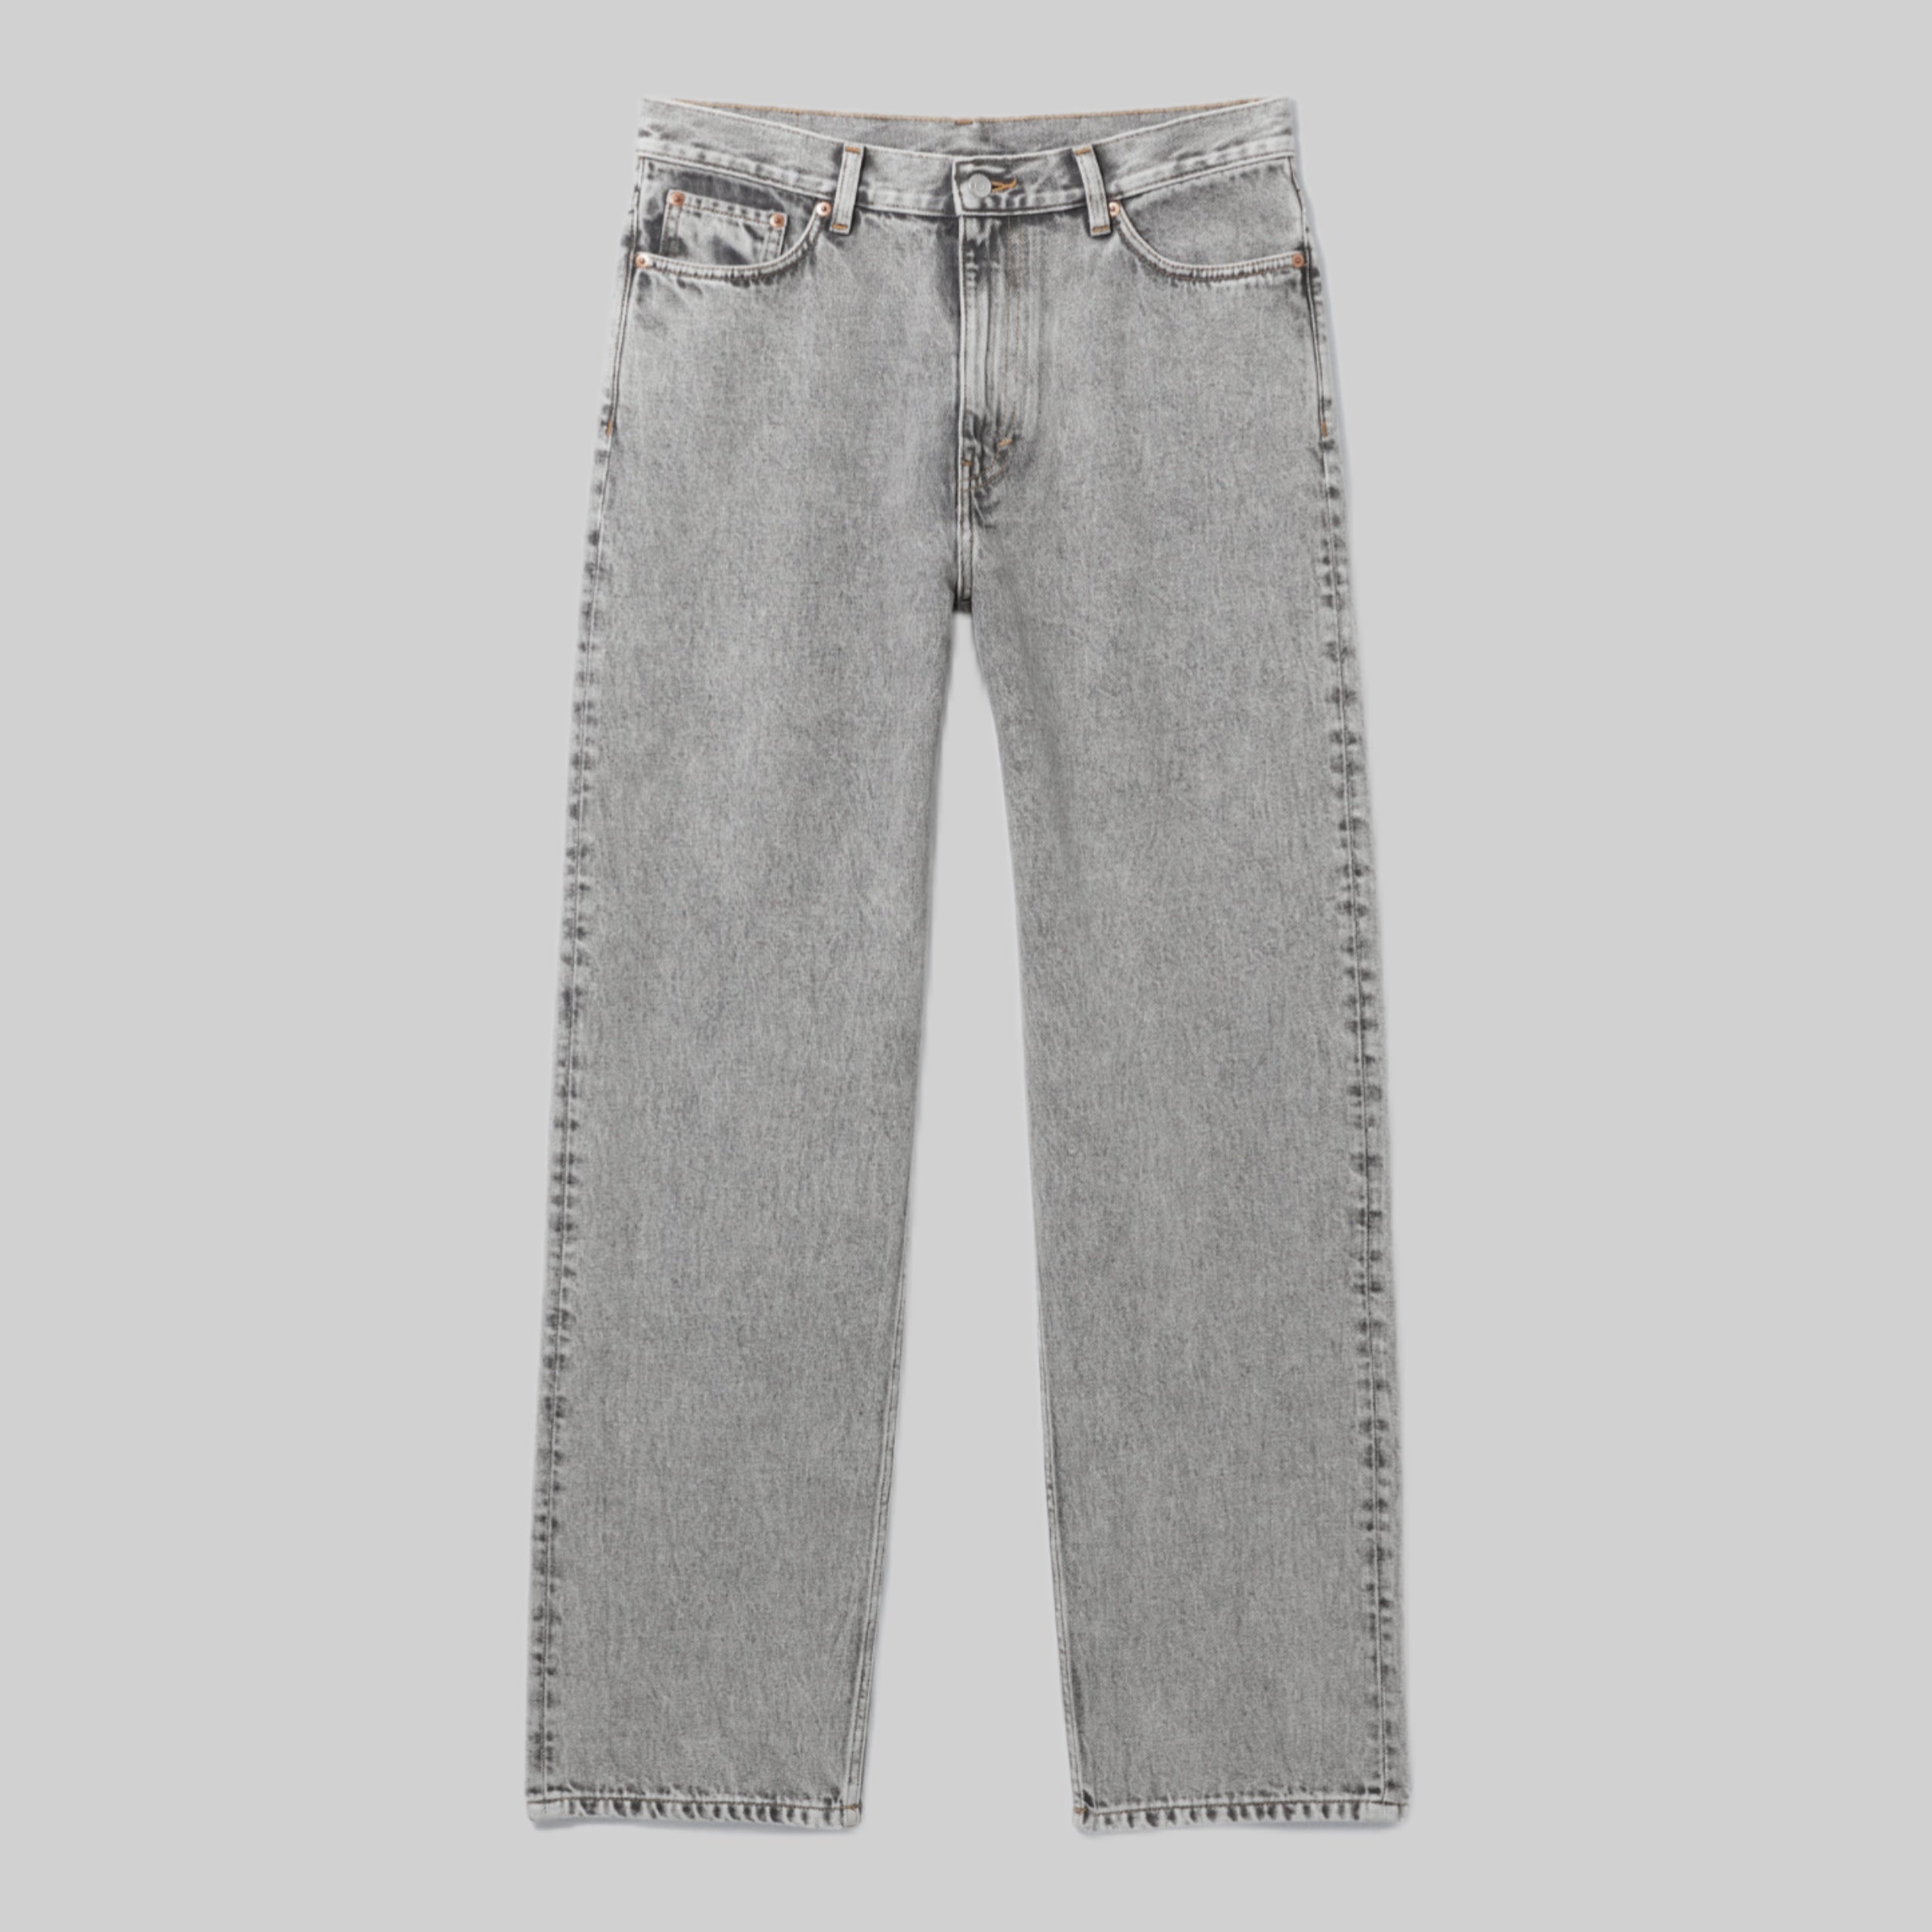 Weekday jeans, frontside, gray